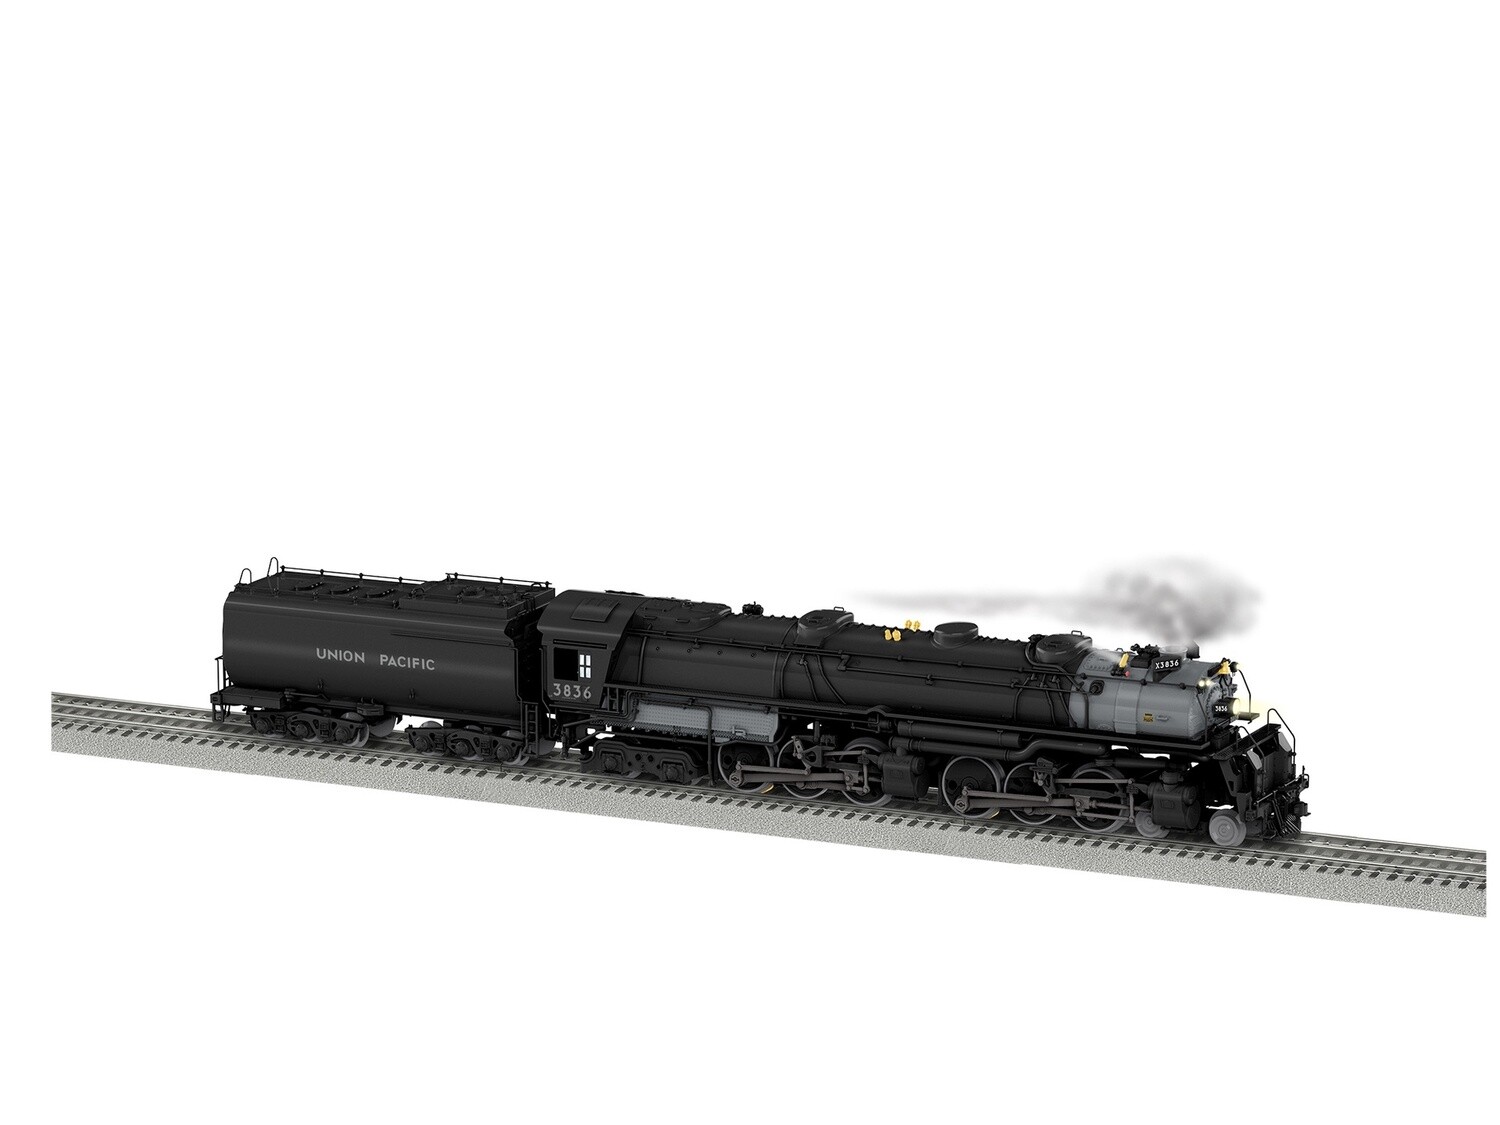 UNION PACIFIC LEGACY CHALLENGER #3836